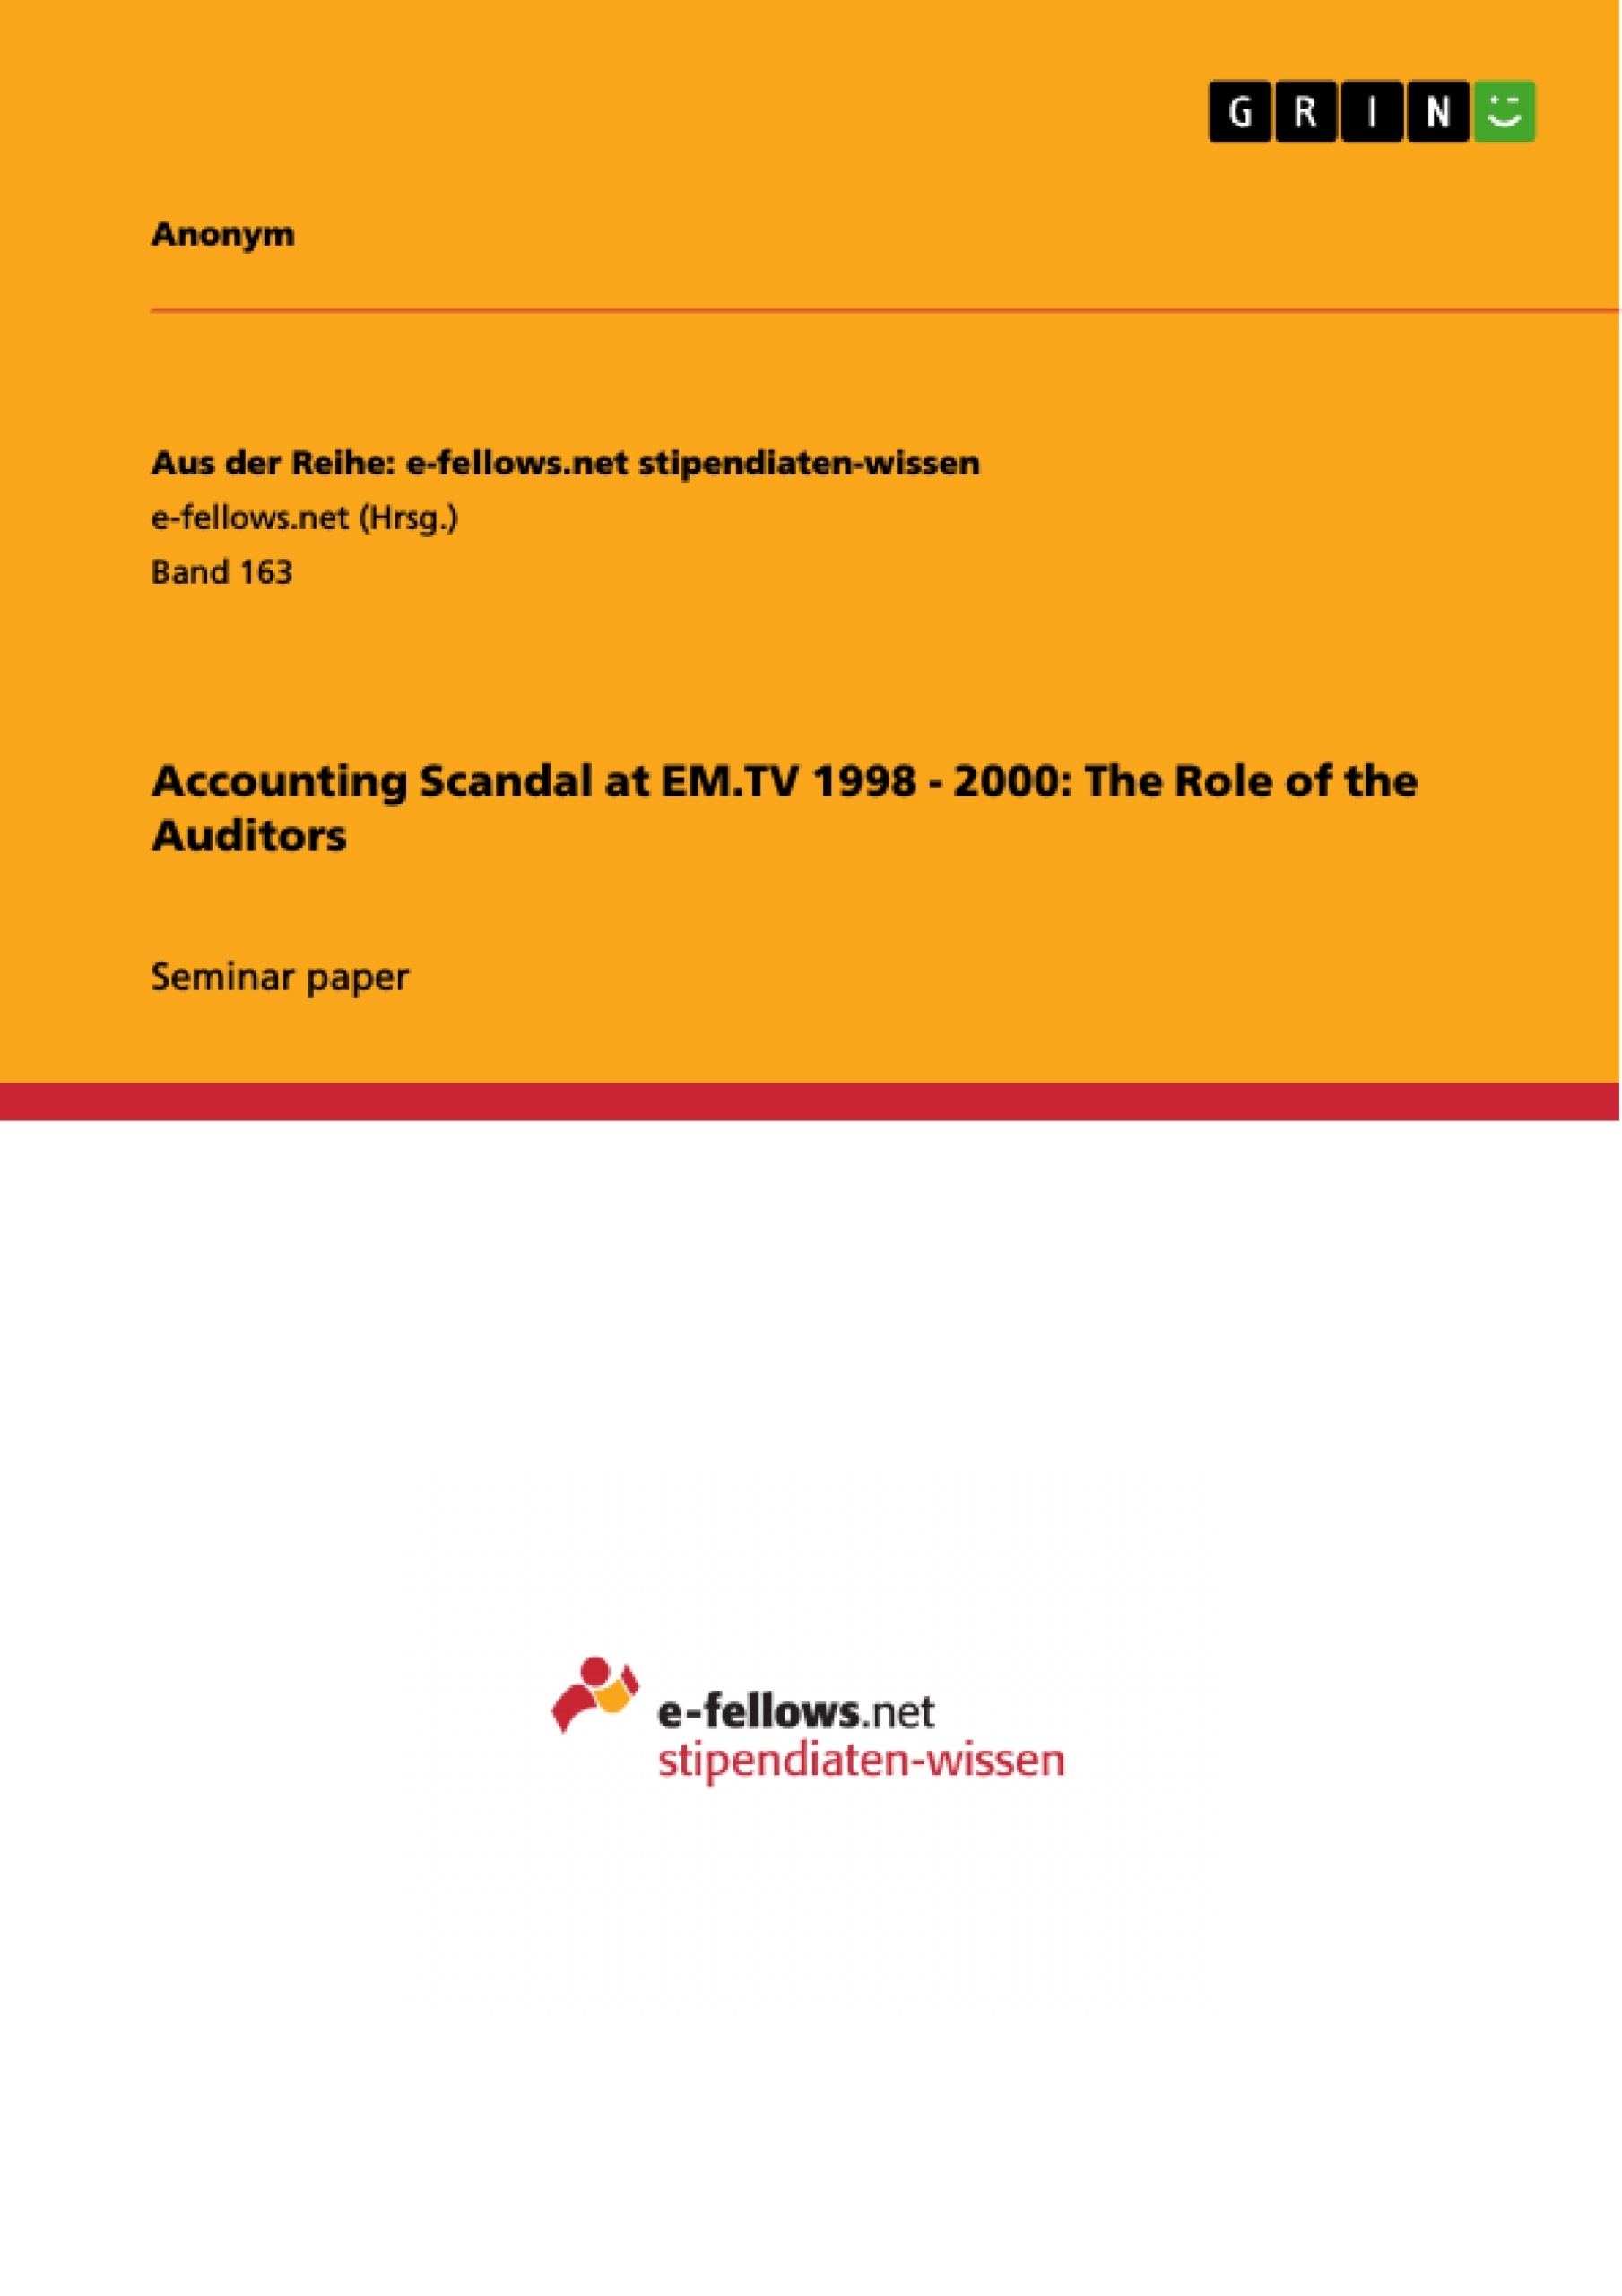 Title: Accounting Scandal at EM.TV 1998 - 2000: The Role of the Auditors